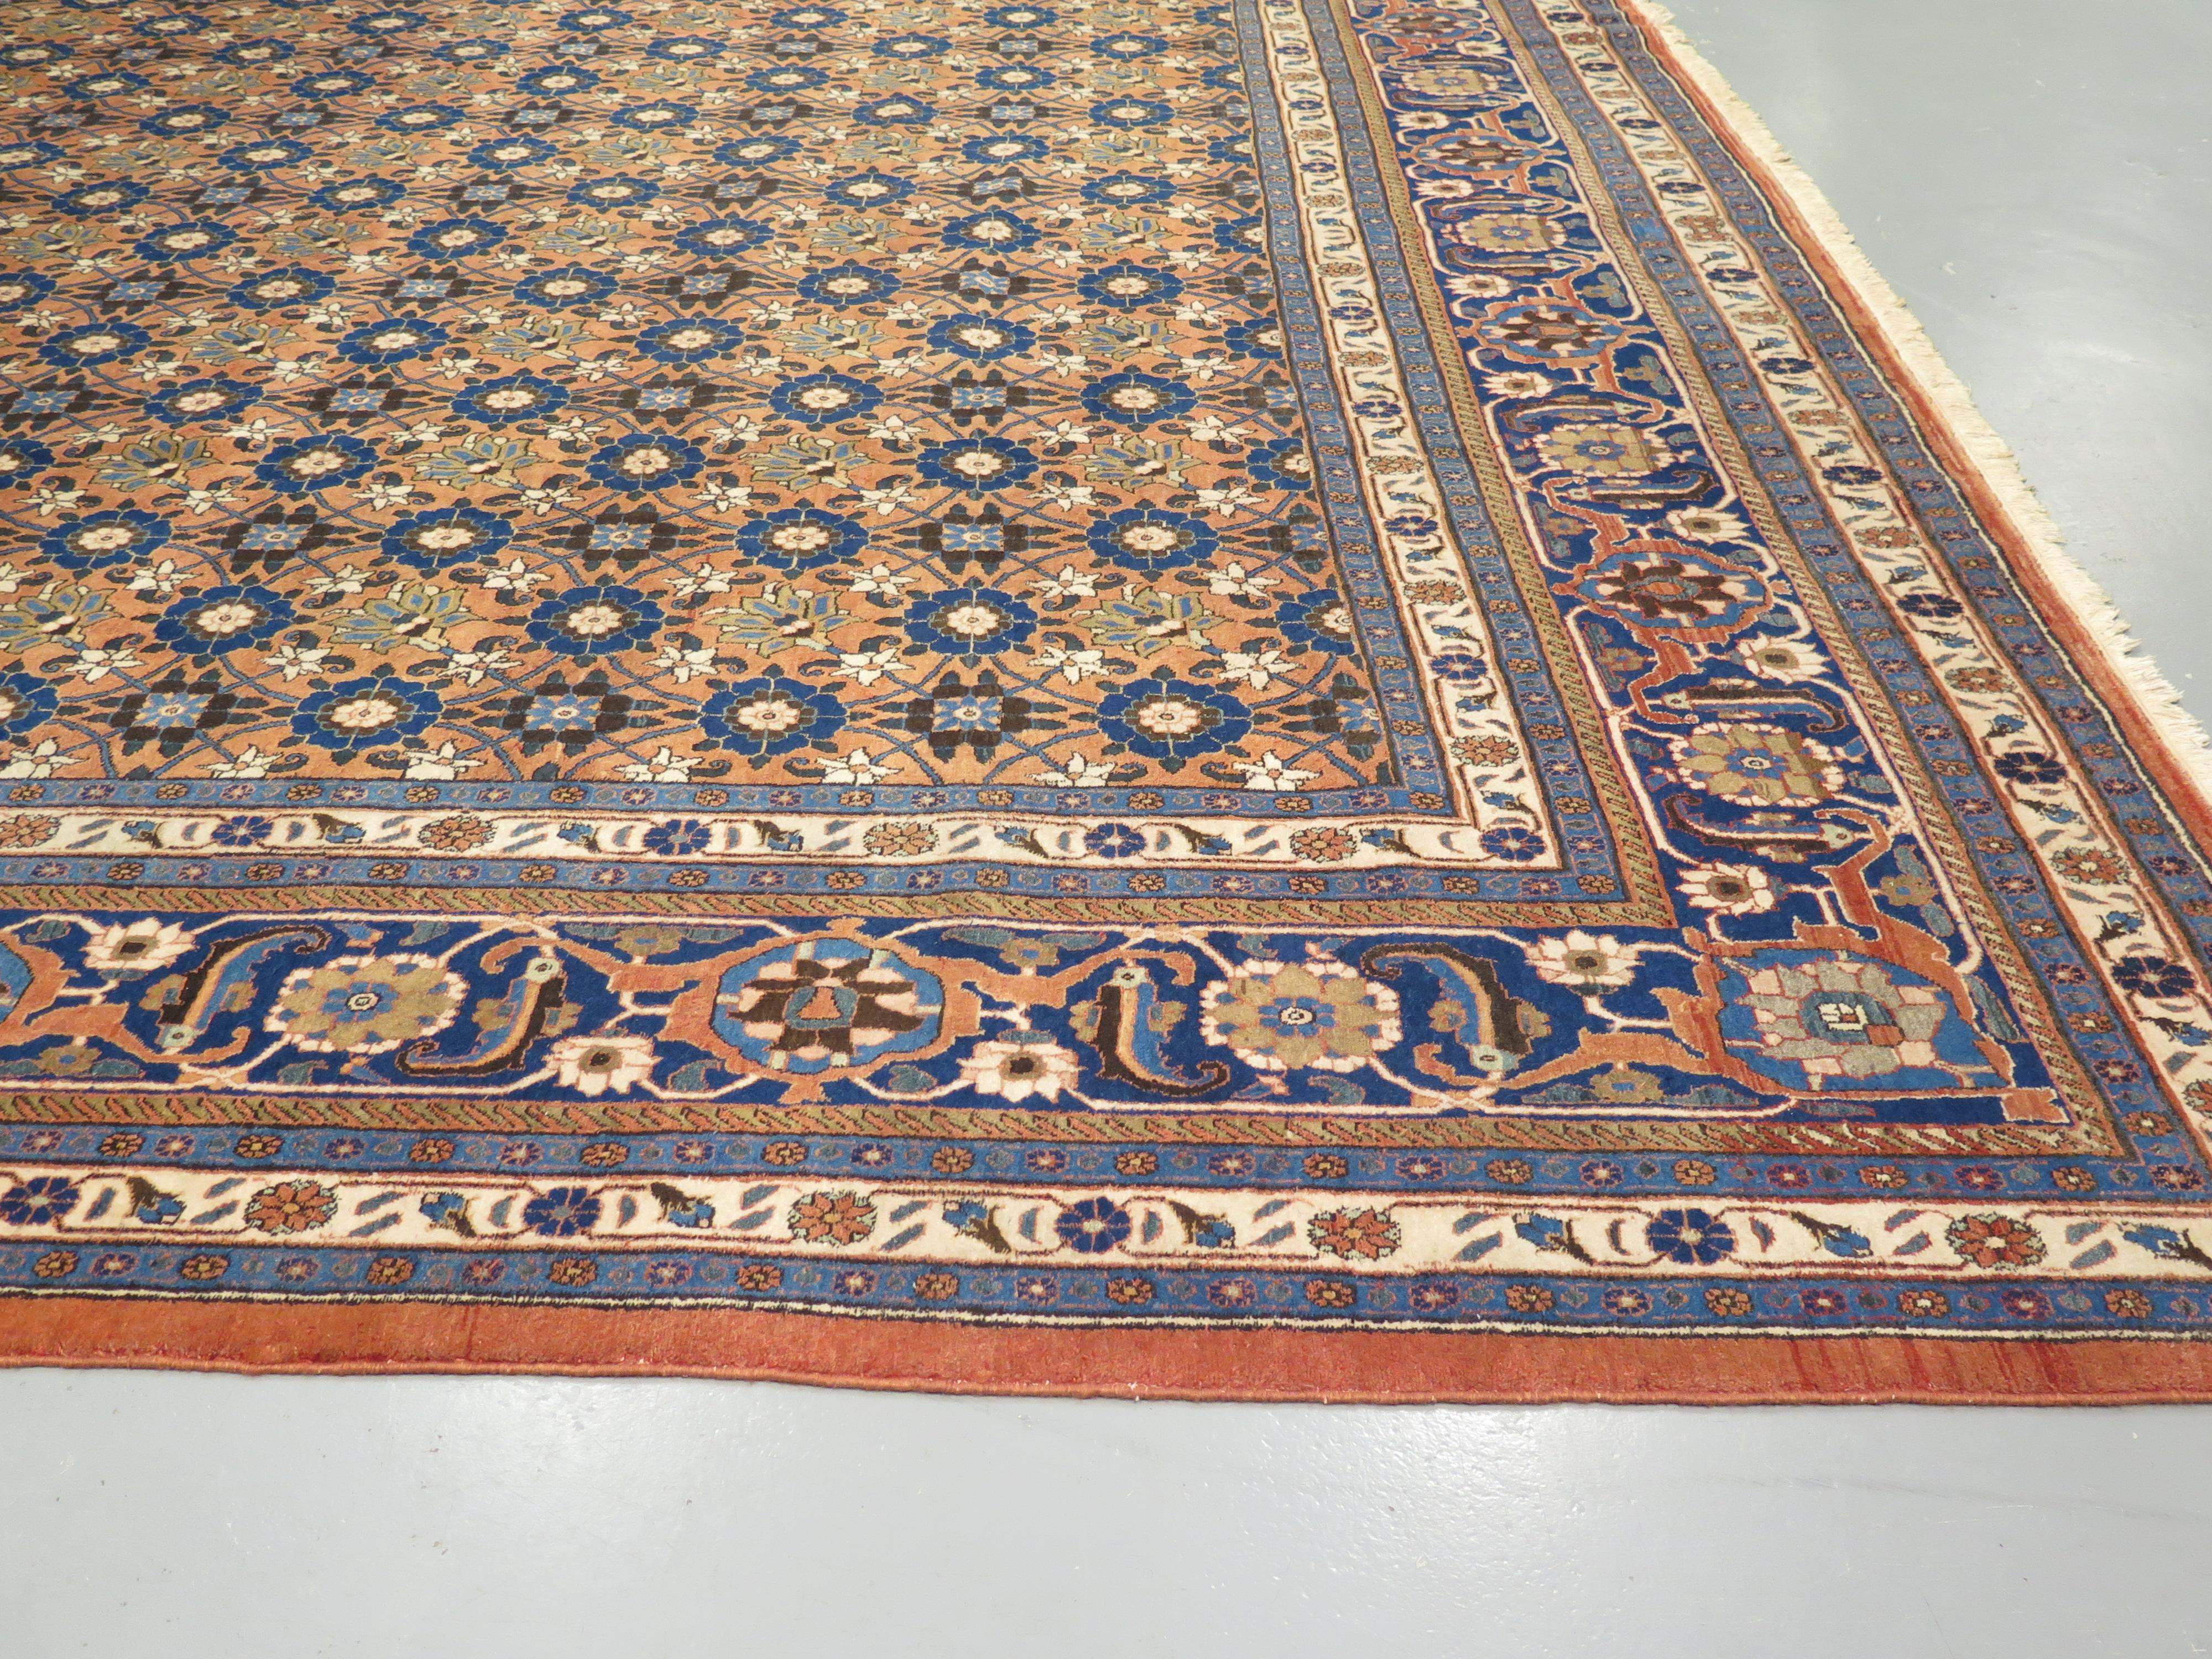 Antique Veramin carpets are widely recognized as among the most exceptional Persian workshop weavings, best known for their remarkable quality, fine crisp drawings and wide variety of rich vegetable-dyed colours. Early Veramin pieces would have been